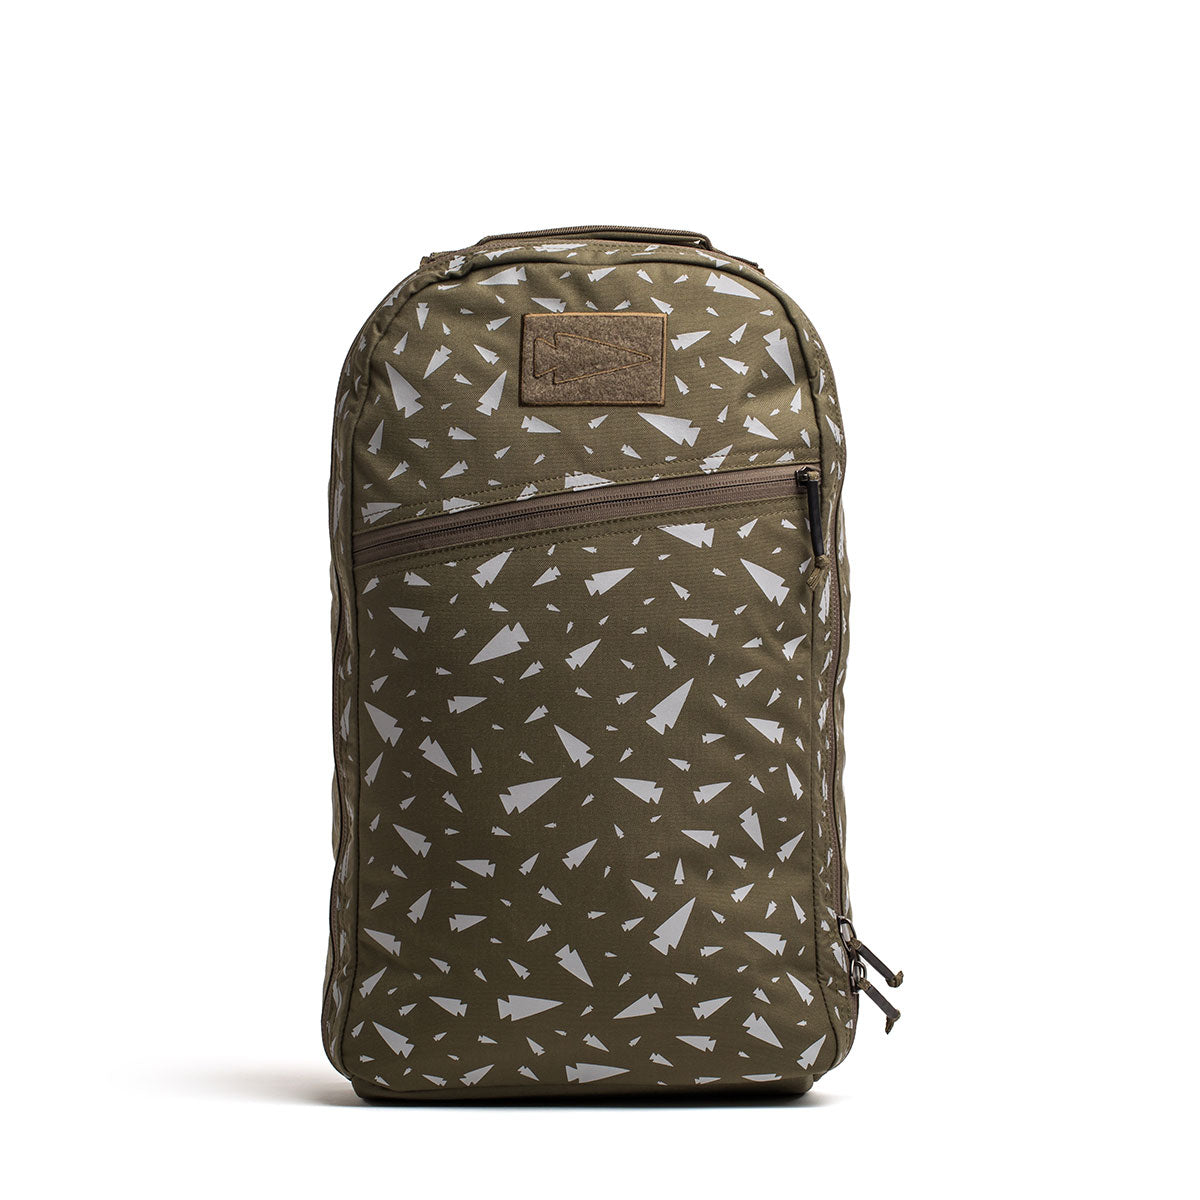 Bullet Ruck - Classic - Reflective Spearhead